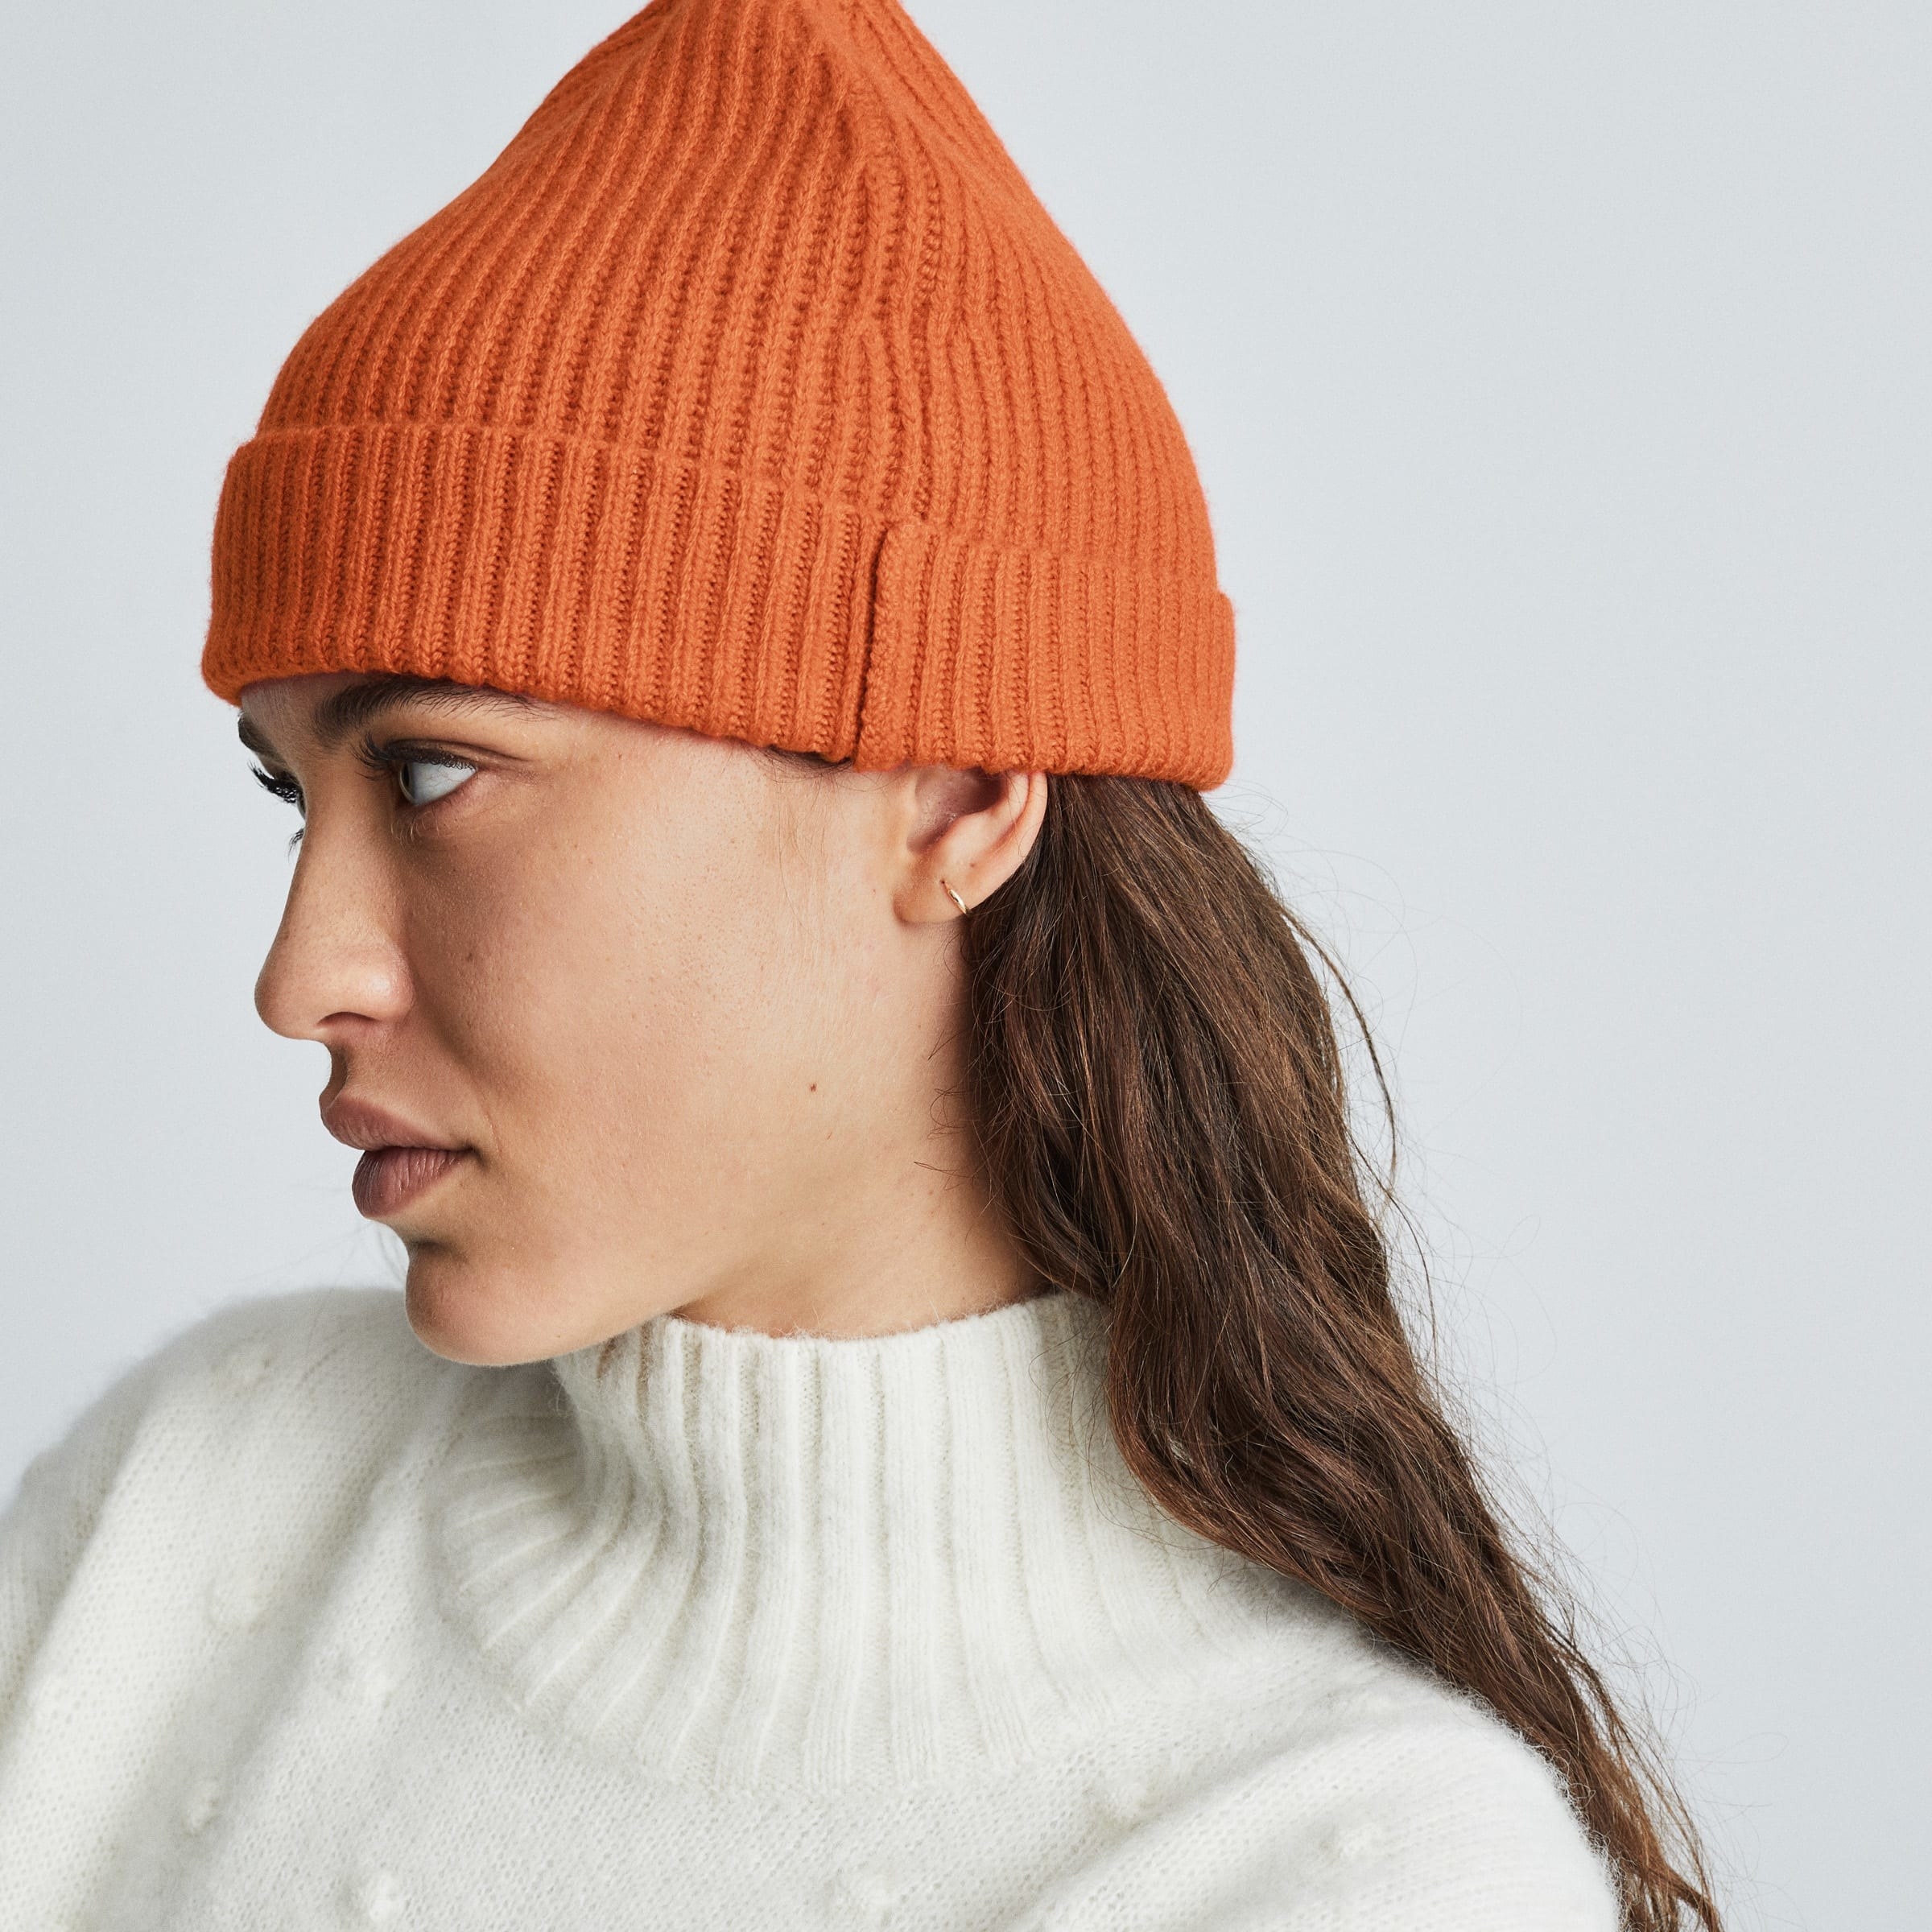 Model wearing the orange beanie with the cuff folded over